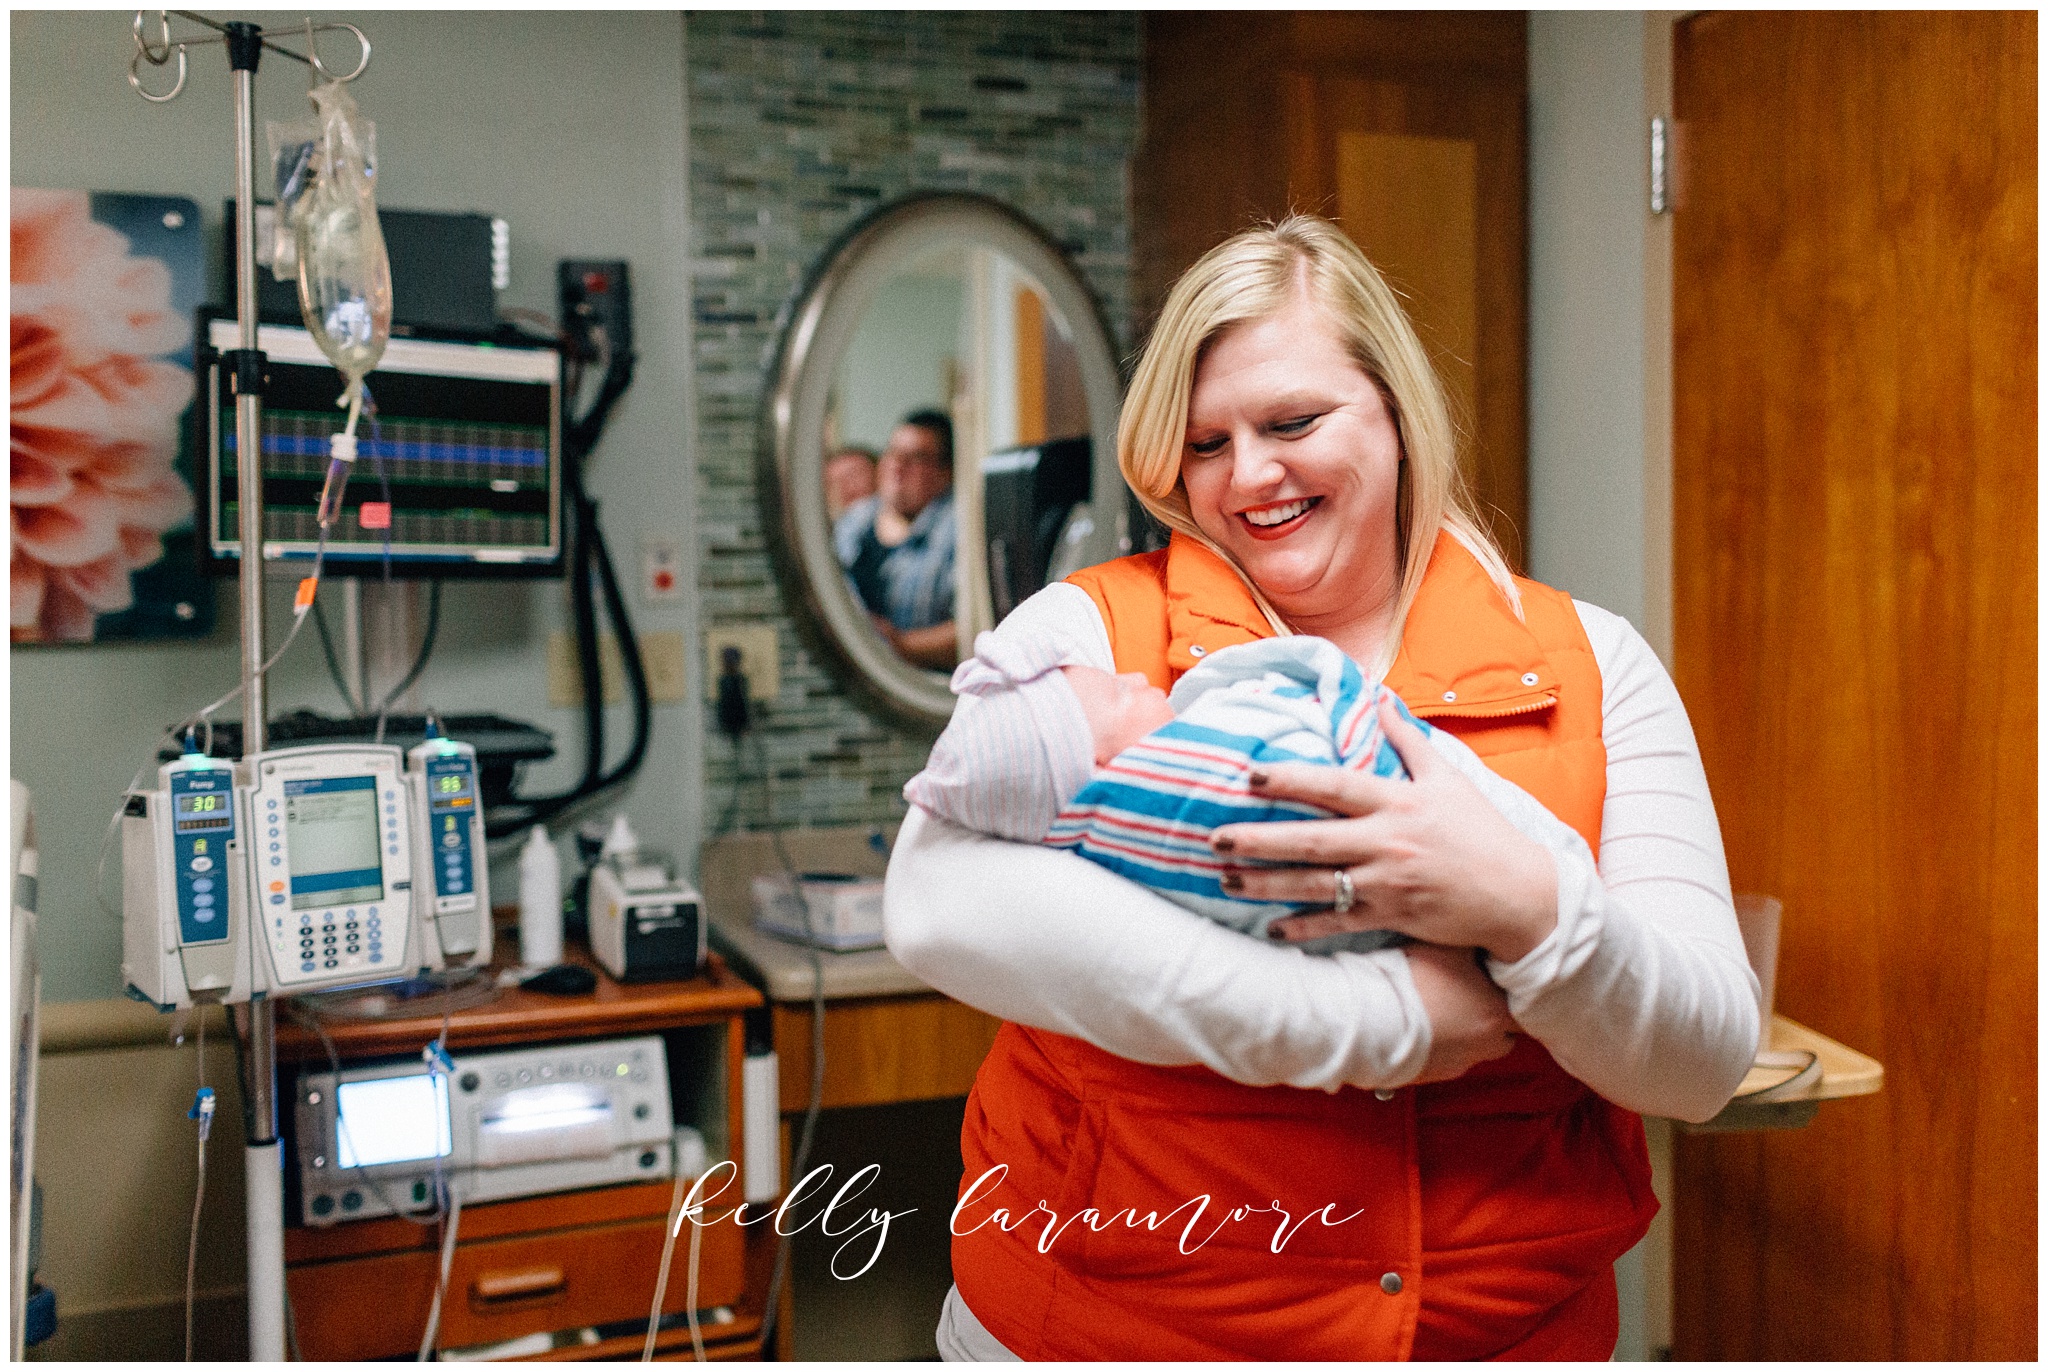 st louis birth story photographer, st louis family photographer, missouri baptist birth center birth, delivery room, aunt holding baby